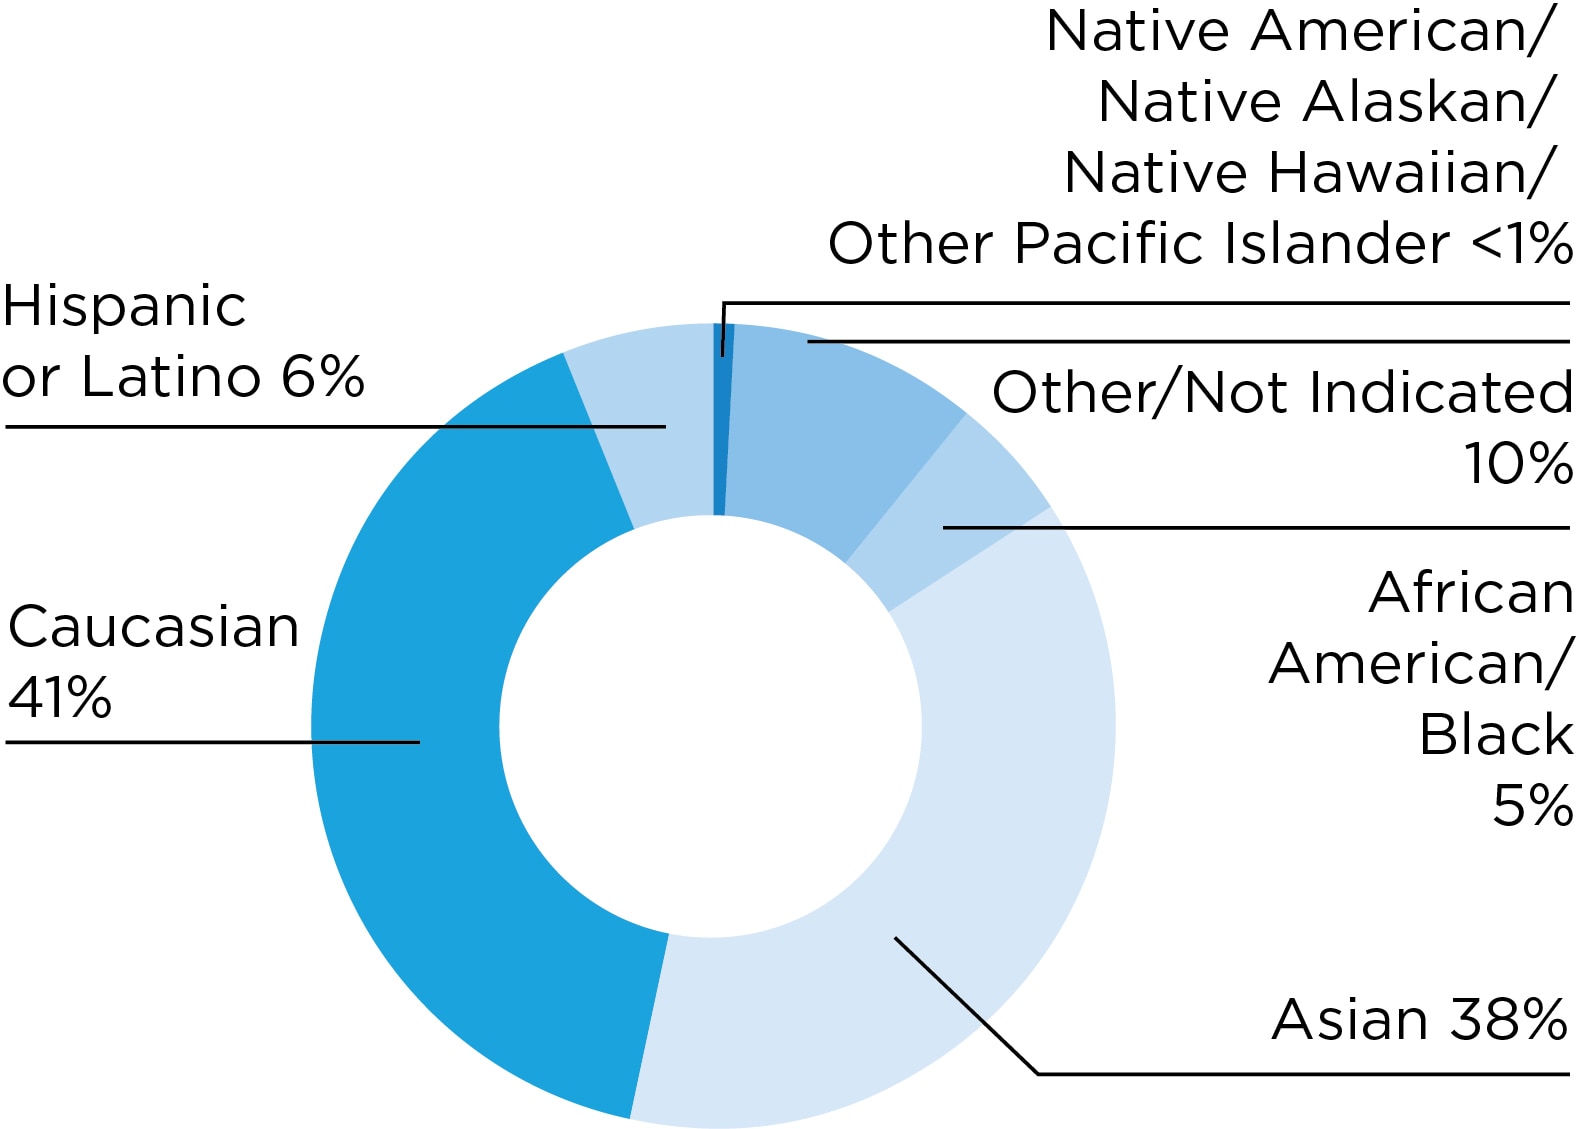 Chart: AACR members by race/ethnicity: Caucasian, 41 percent; Asian, 38 percent; Hispanic or Latino, 6 percent; African American/Black, 5 percent; Native American/Native Alaskan/Native Hawaiian/Other Pacific Islander, <1 percent; Other/not indicated, 10 percent.